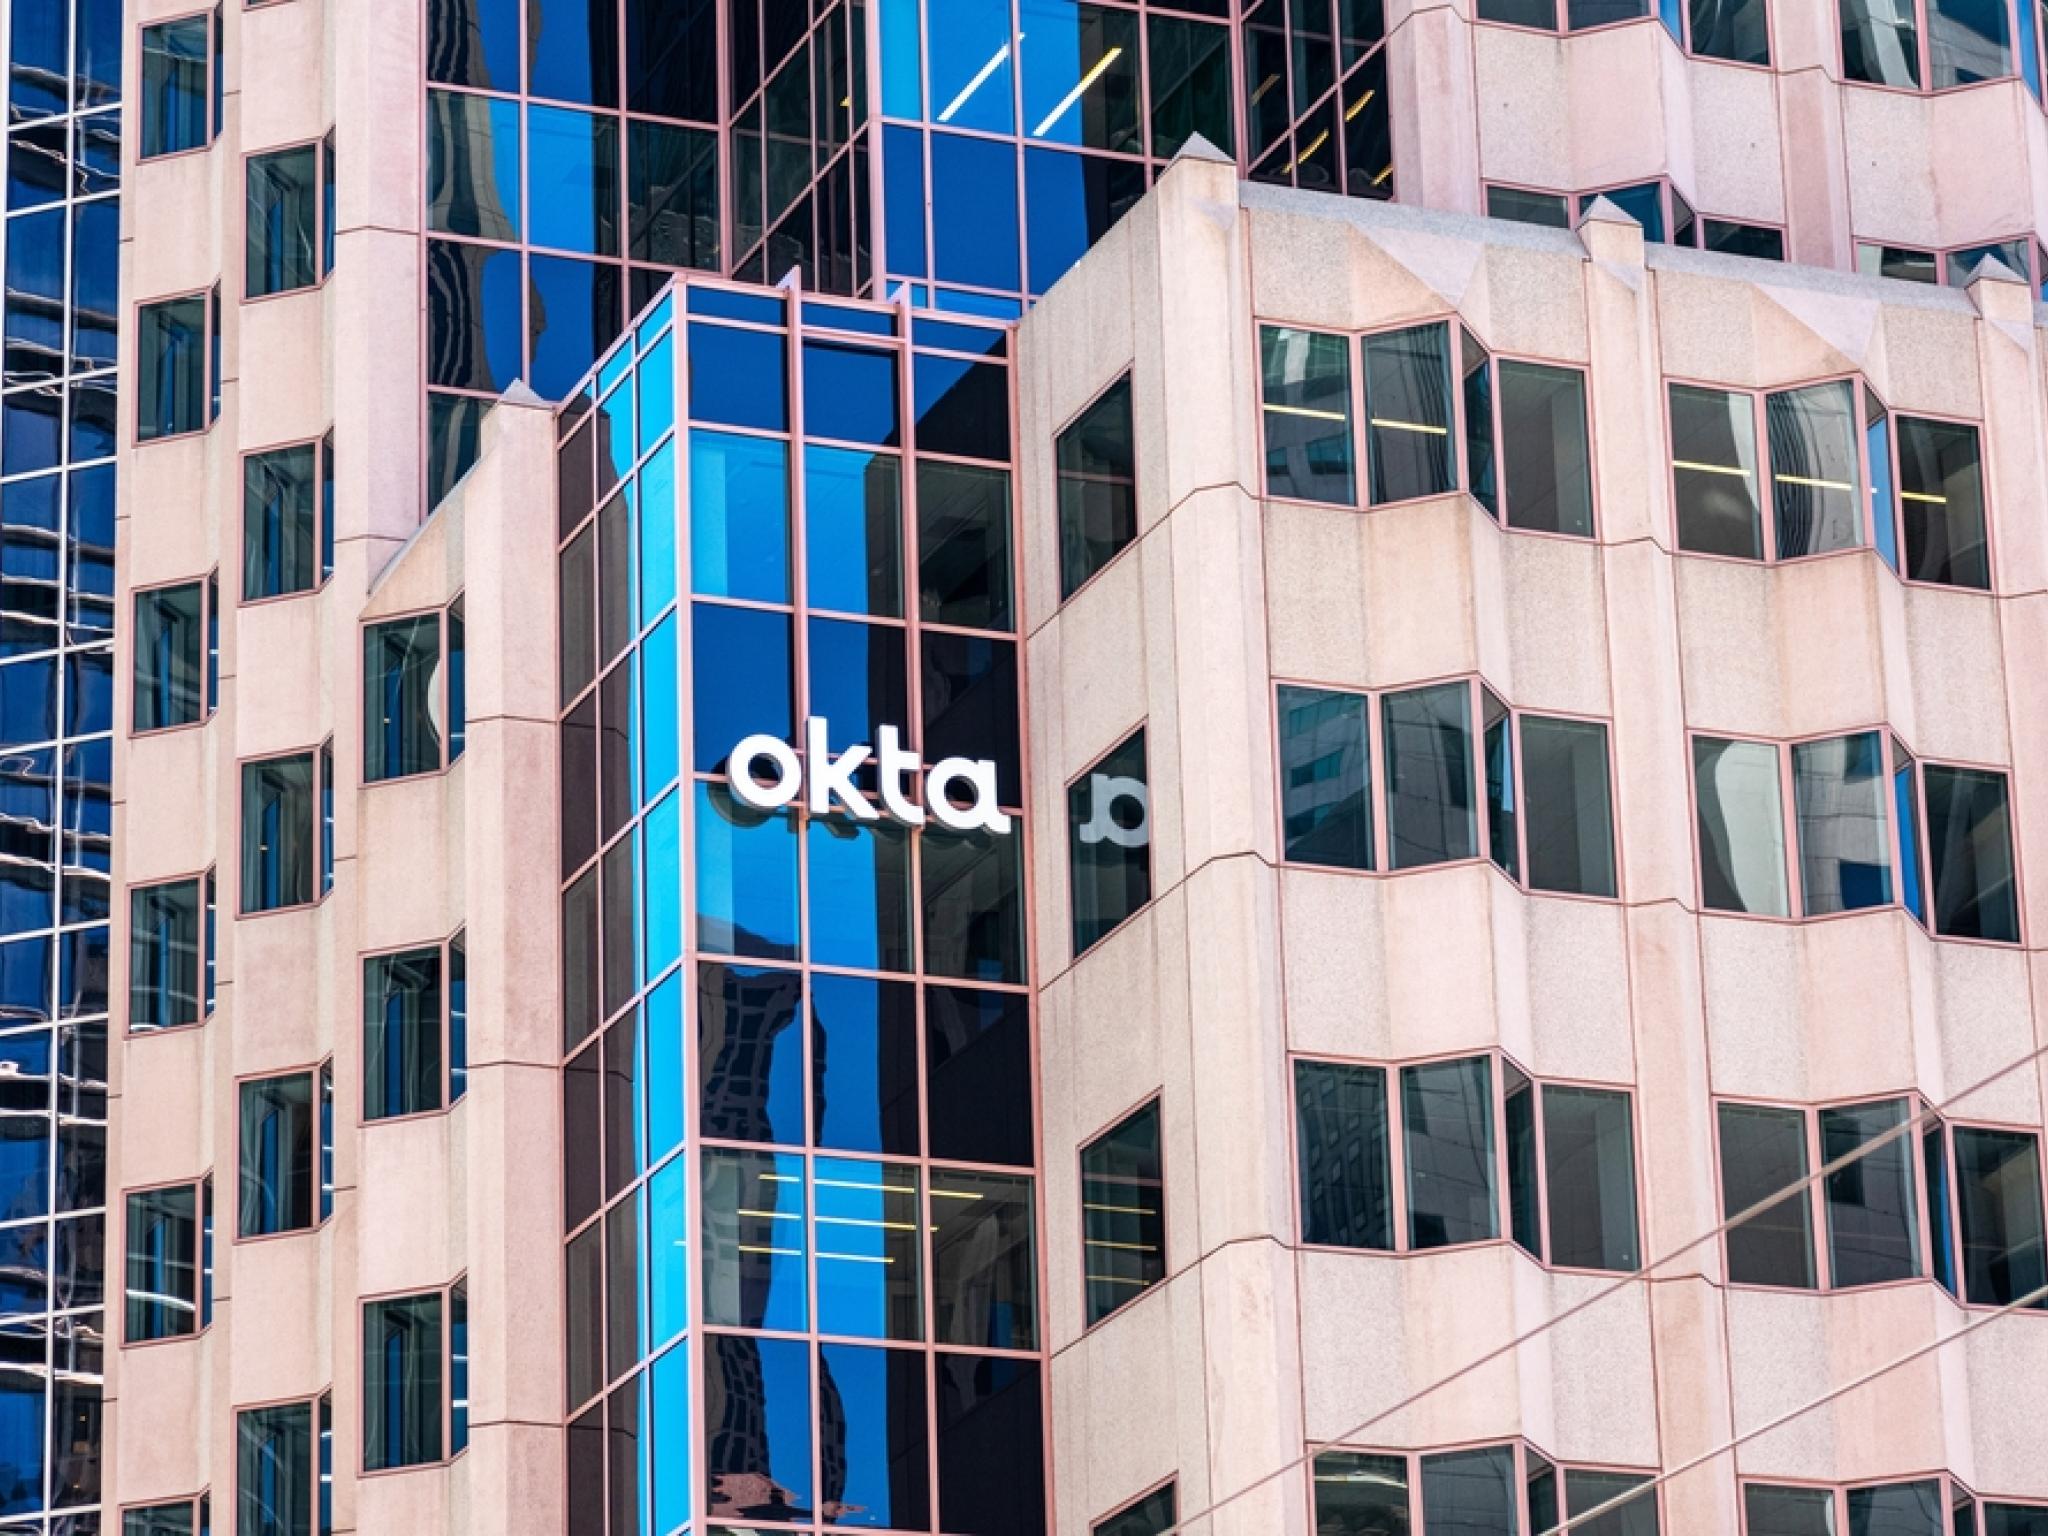  oktas-crisis-deepens-with-hackers-accessing-full-client-list-and-falling-company-shares 